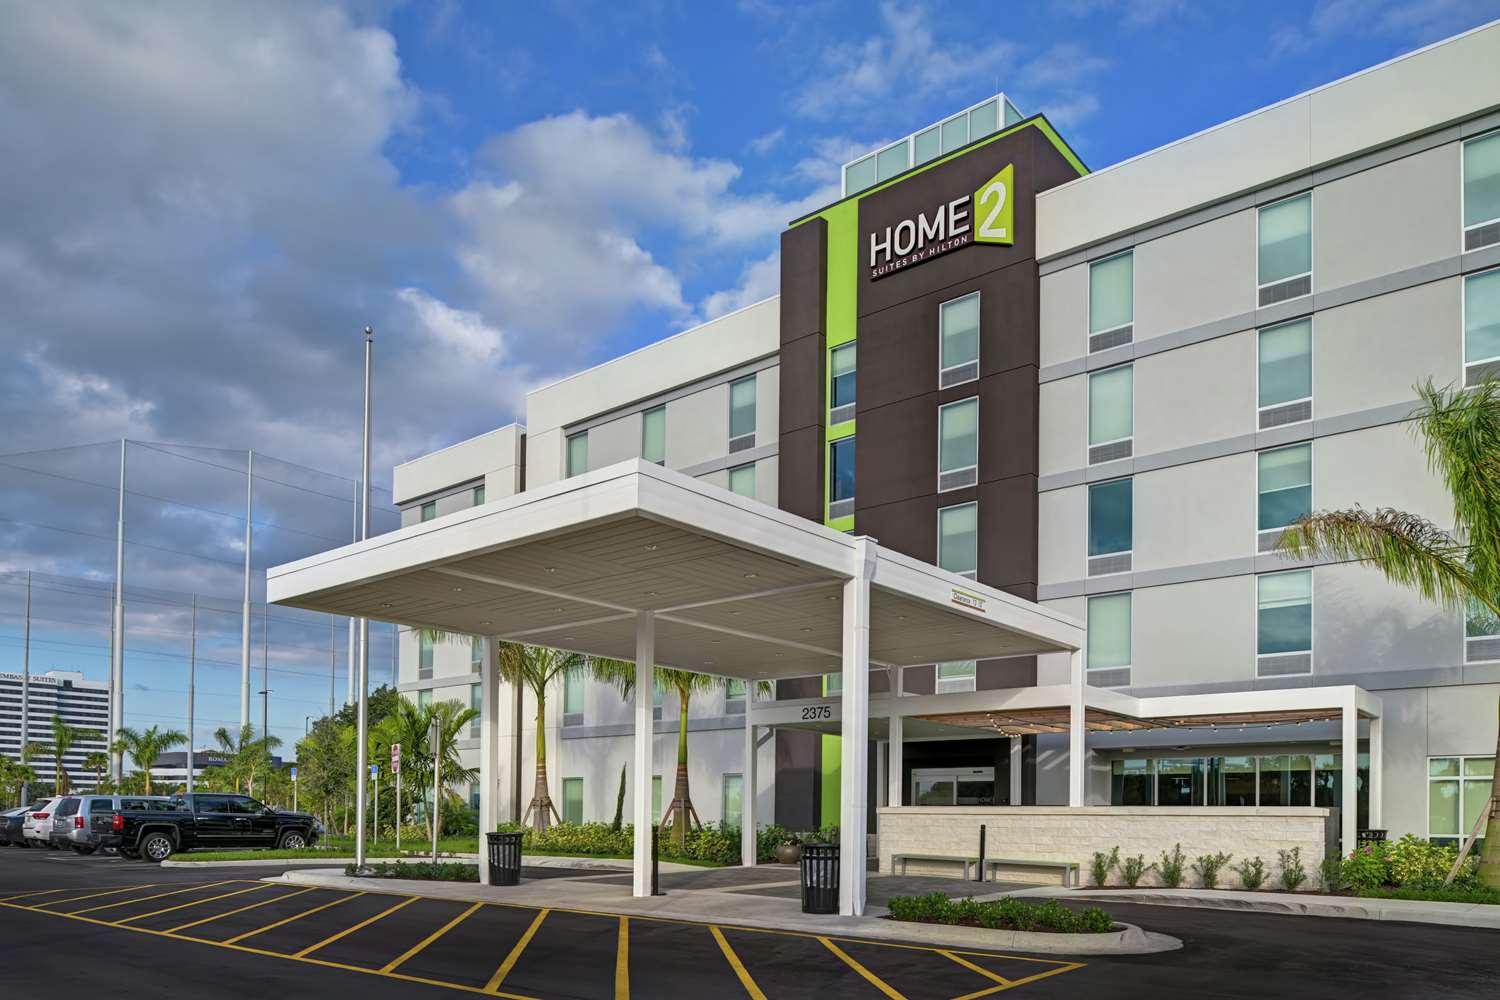 Home2 Suites by Hilton West Palm Beach Airport in West Palm Beach, FL